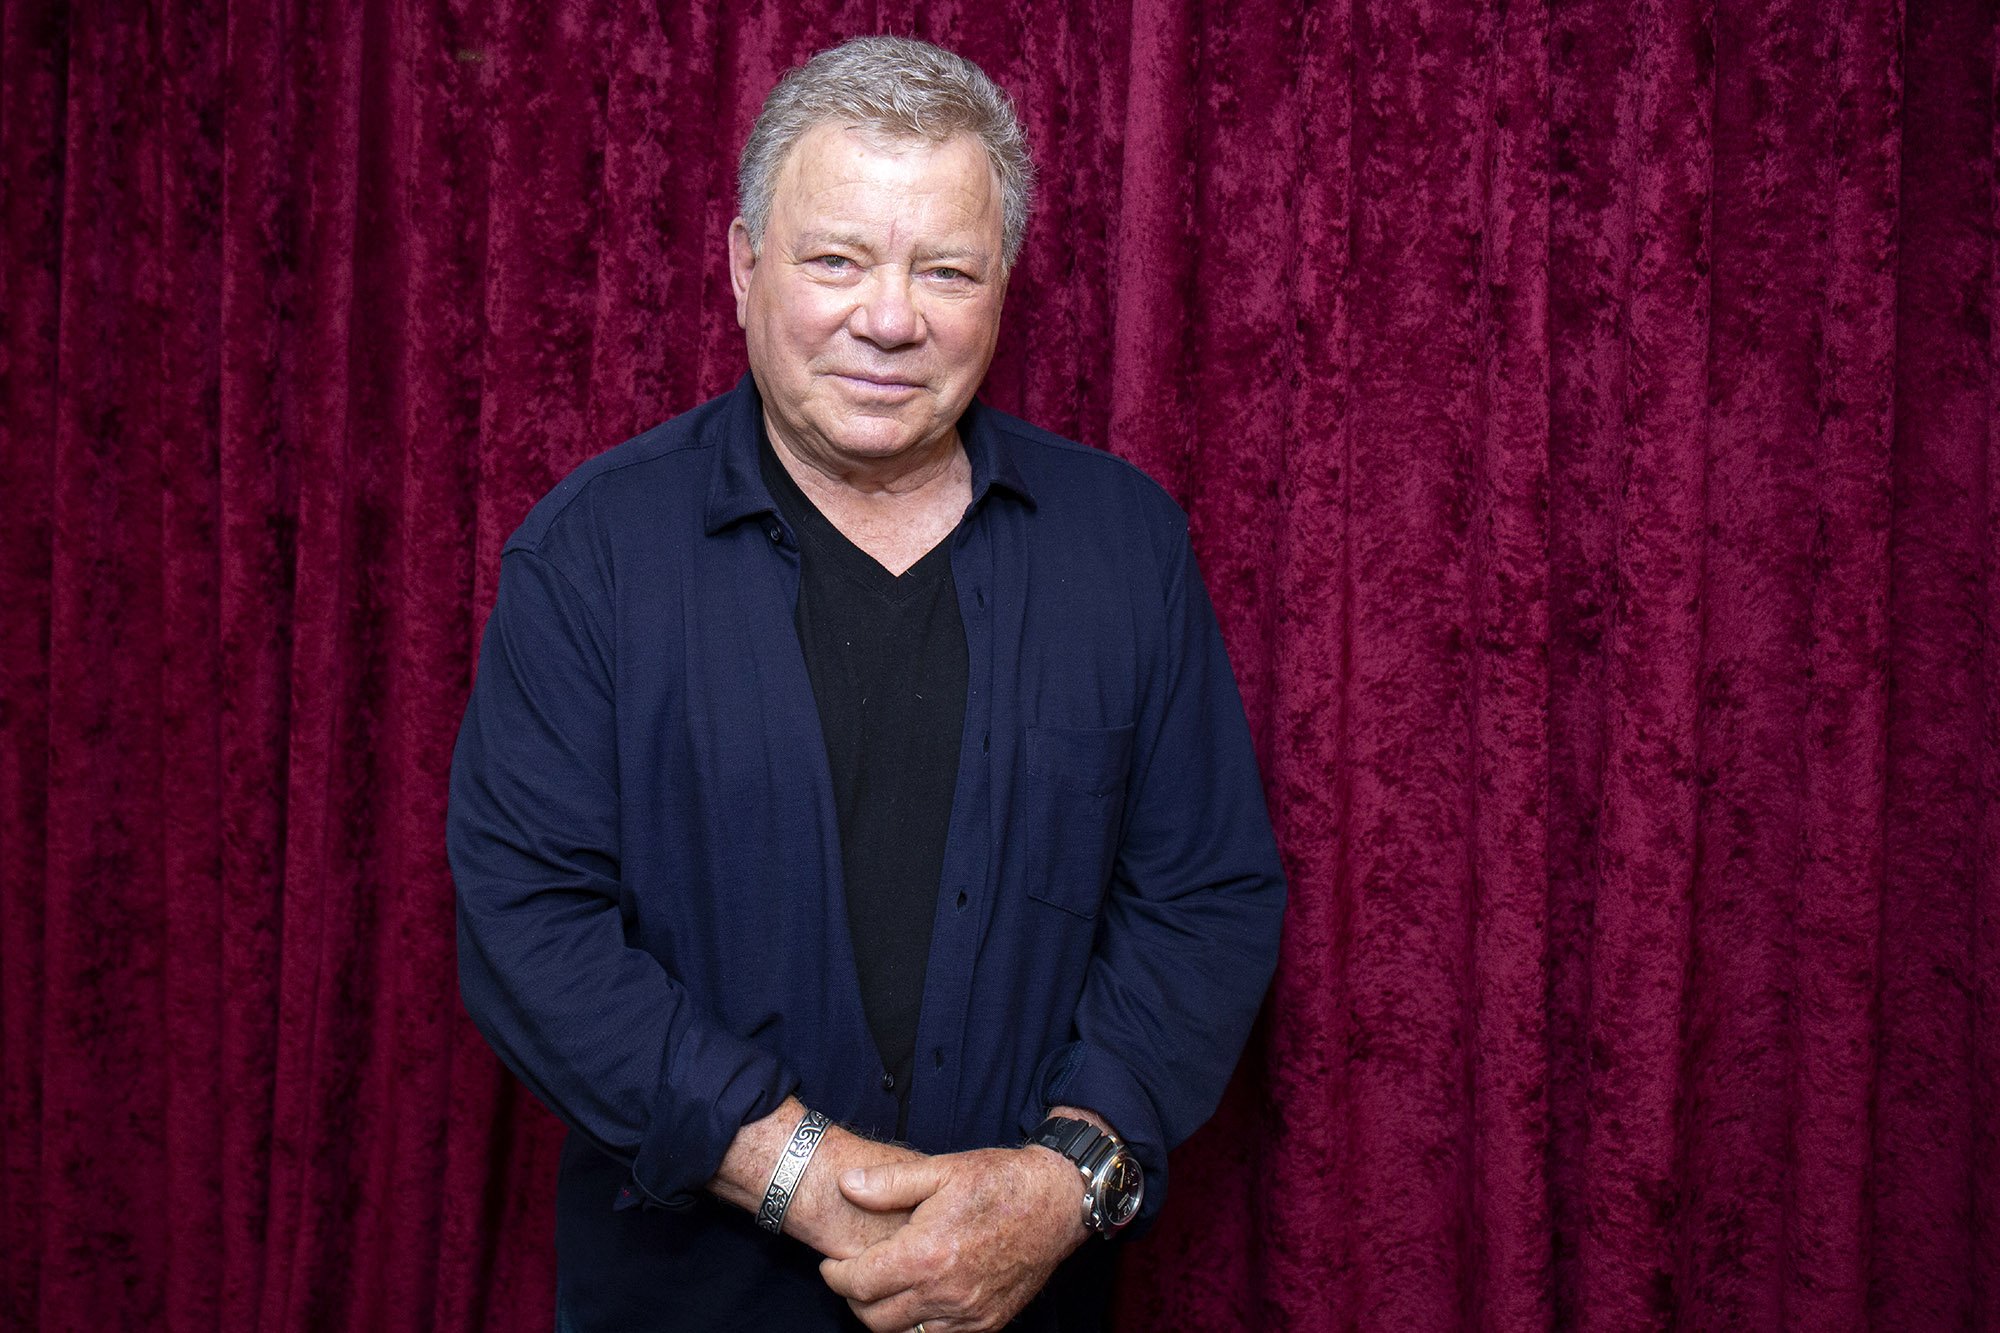 William Shatner is 90 today, and still working his ass off